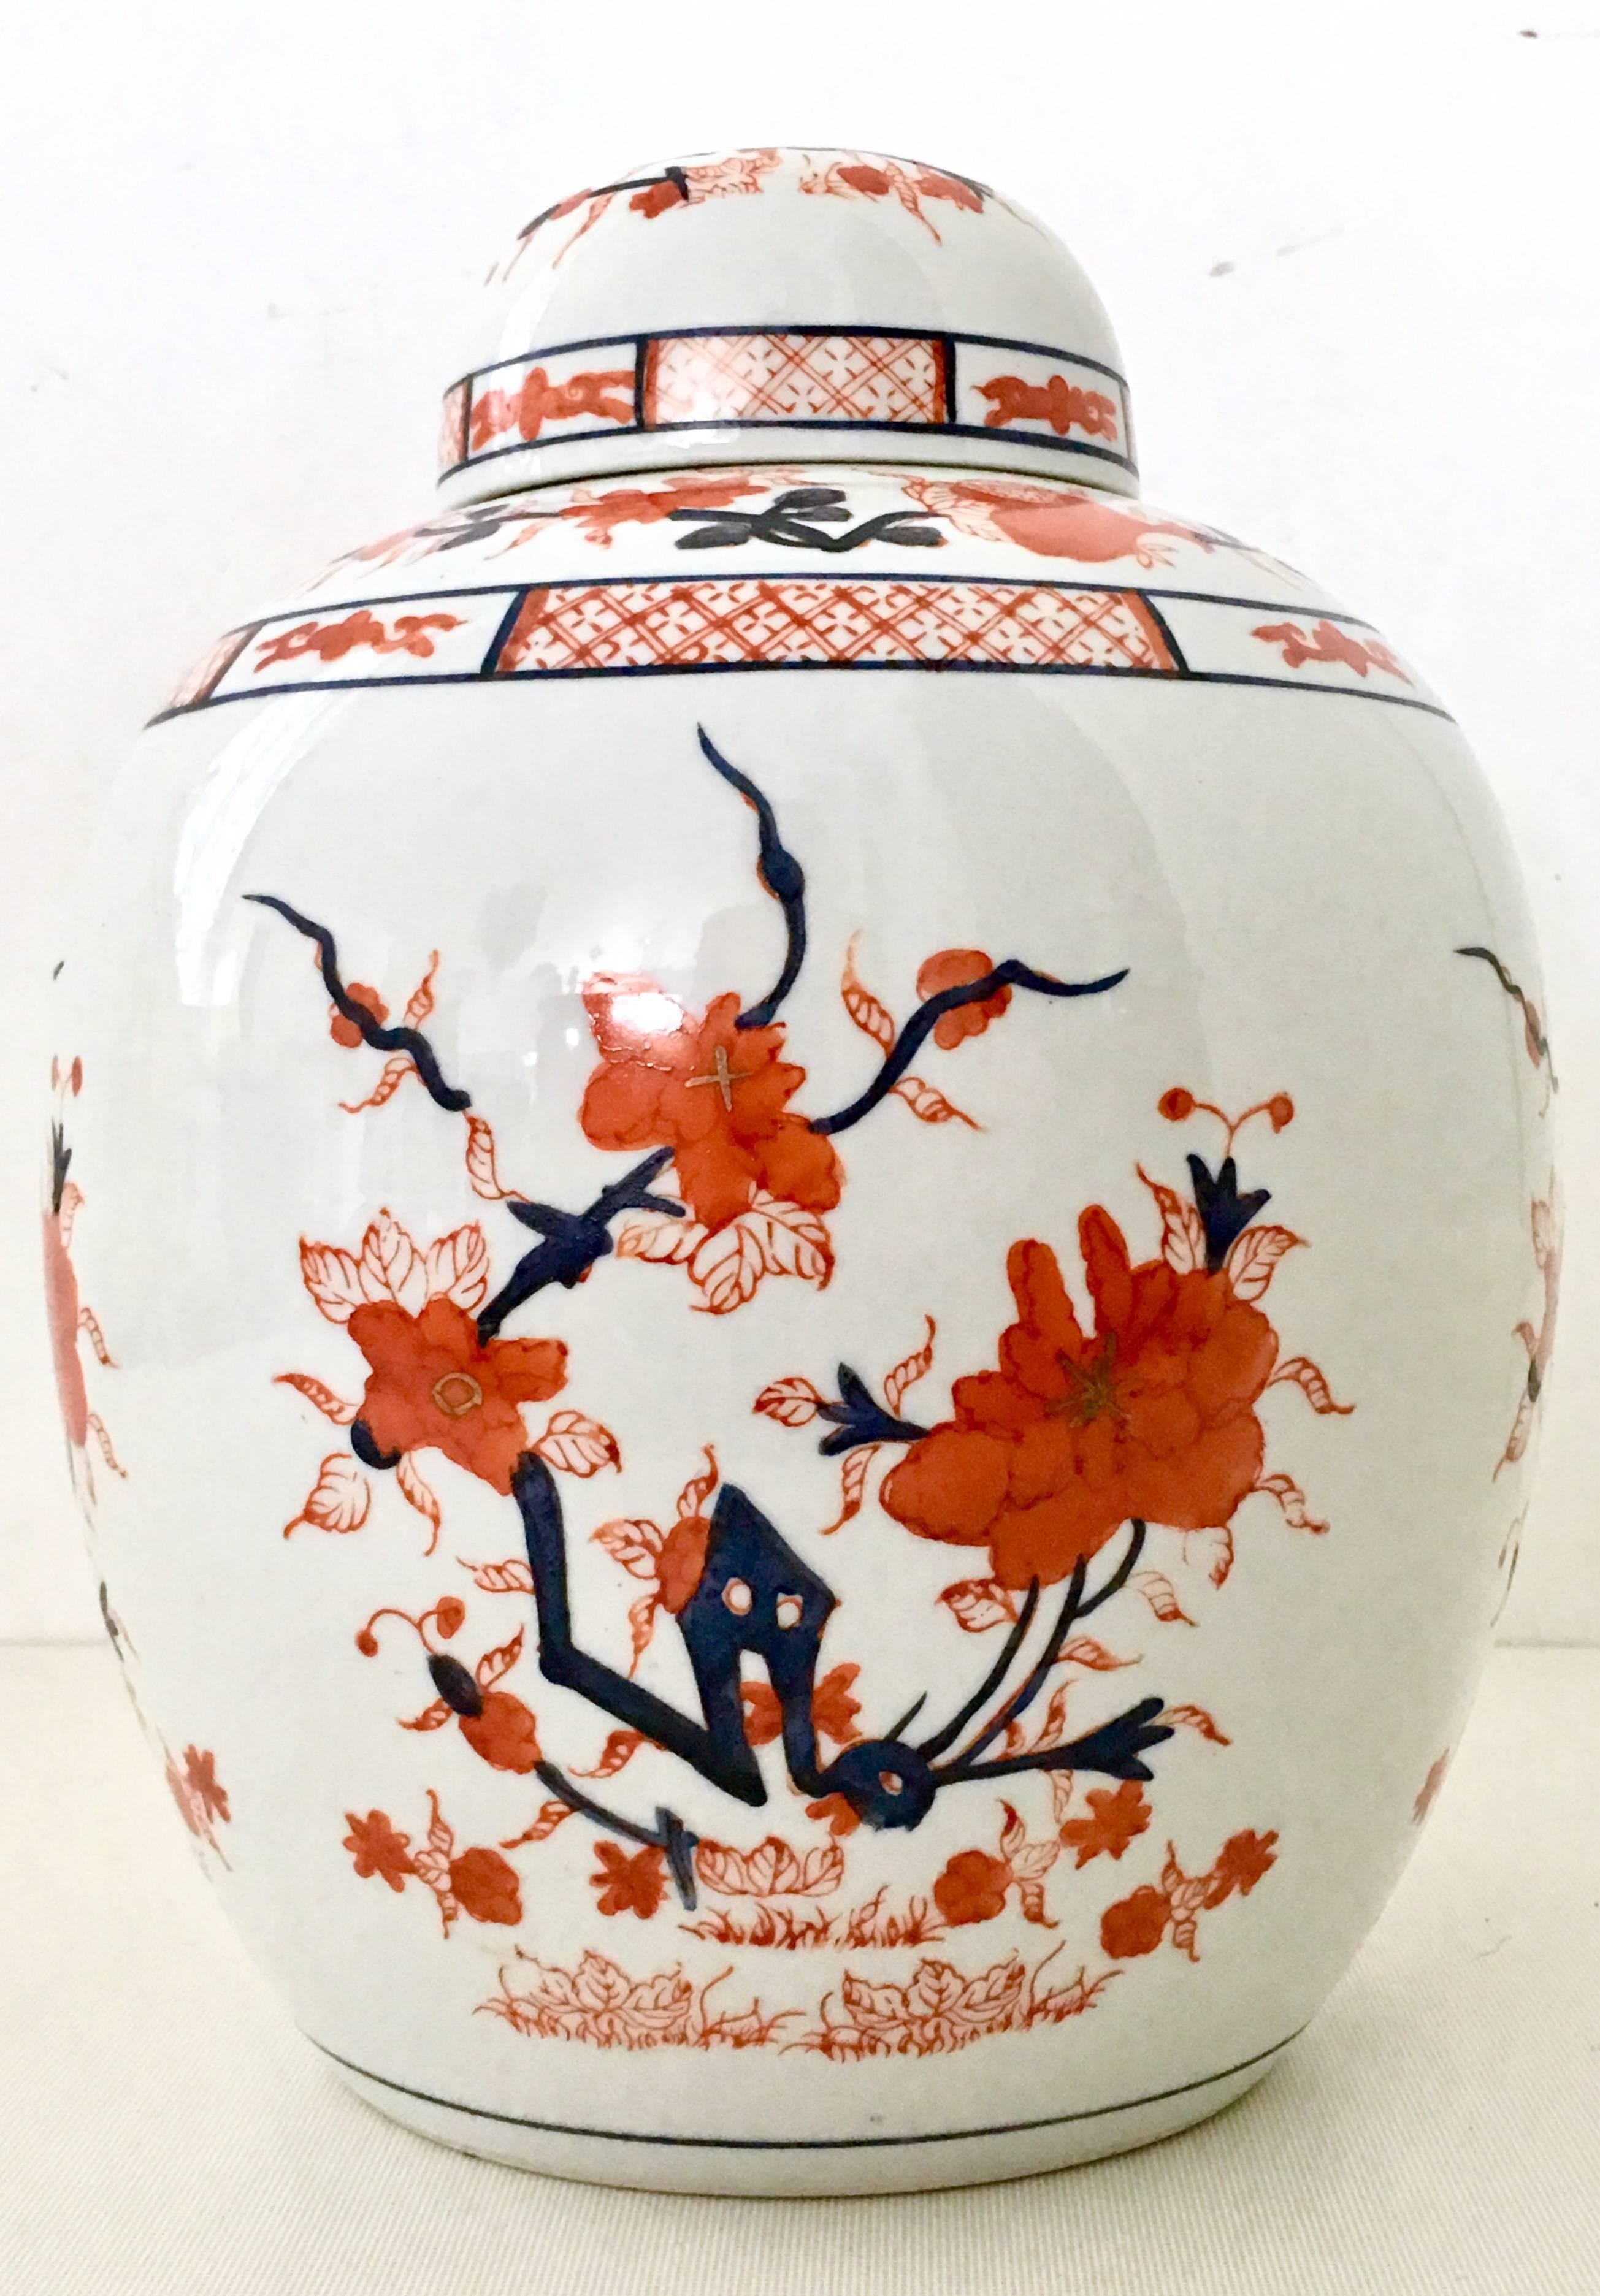 1970s Japanese Imari hand-painted lidded ginger jar-signed. This Classic Imari hand-painted with 22-karat gold accent is signed on the underside, decorated in Hong Kong.
  